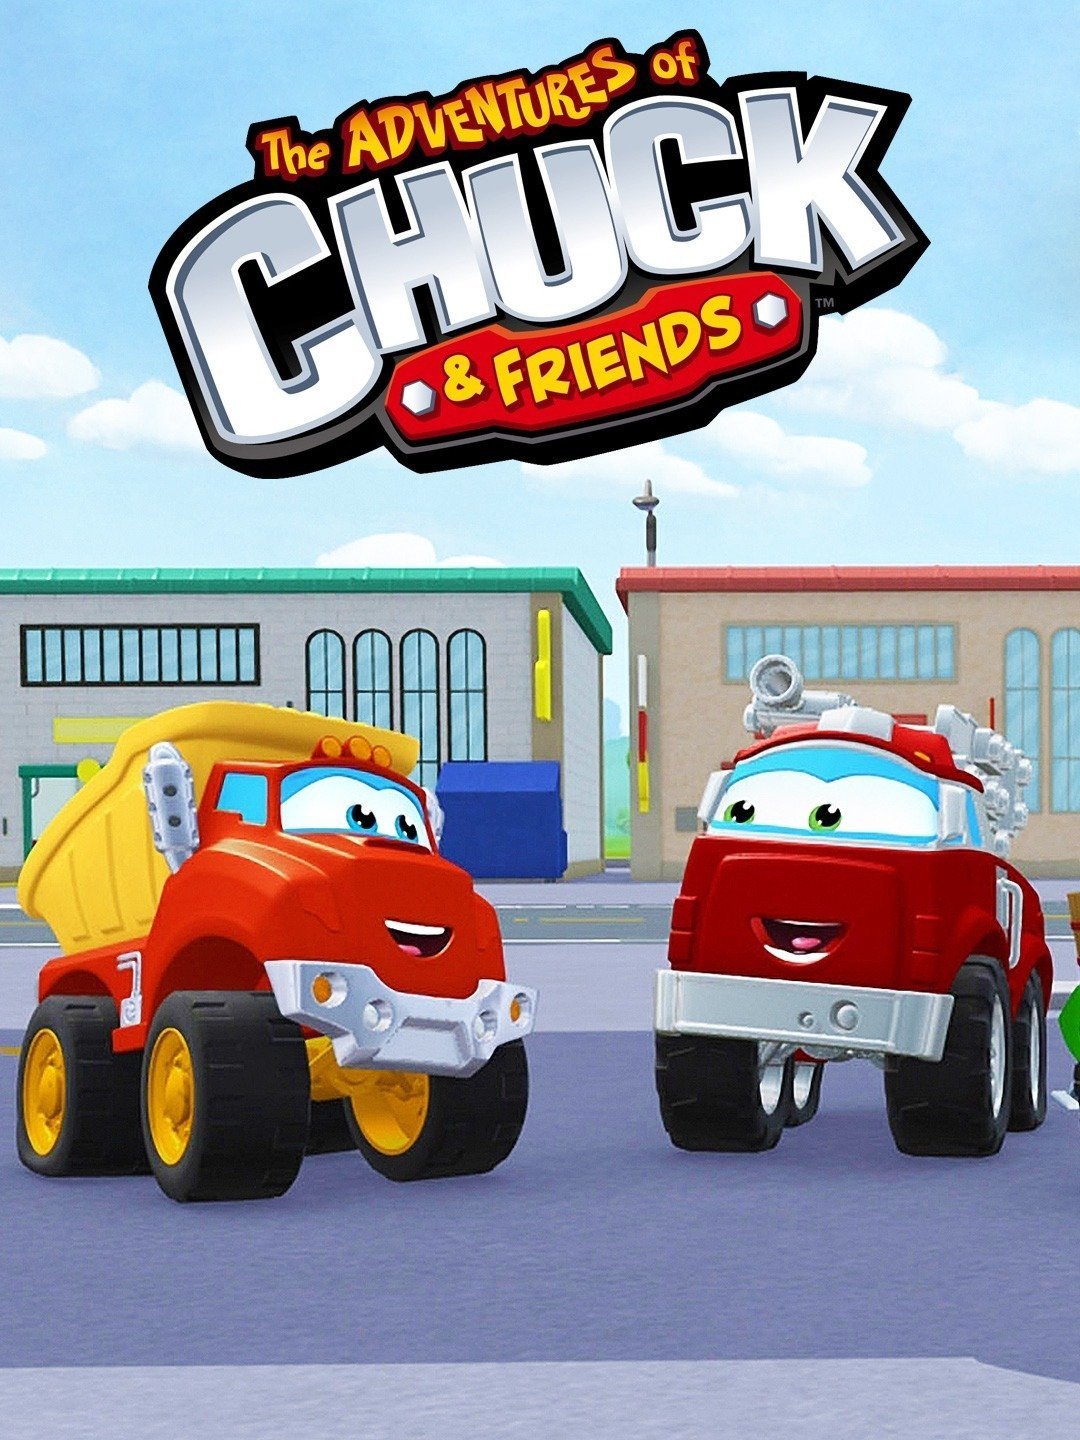 The Adventures of Chuck and Friends Funding Credits. WKBS PBS Kids